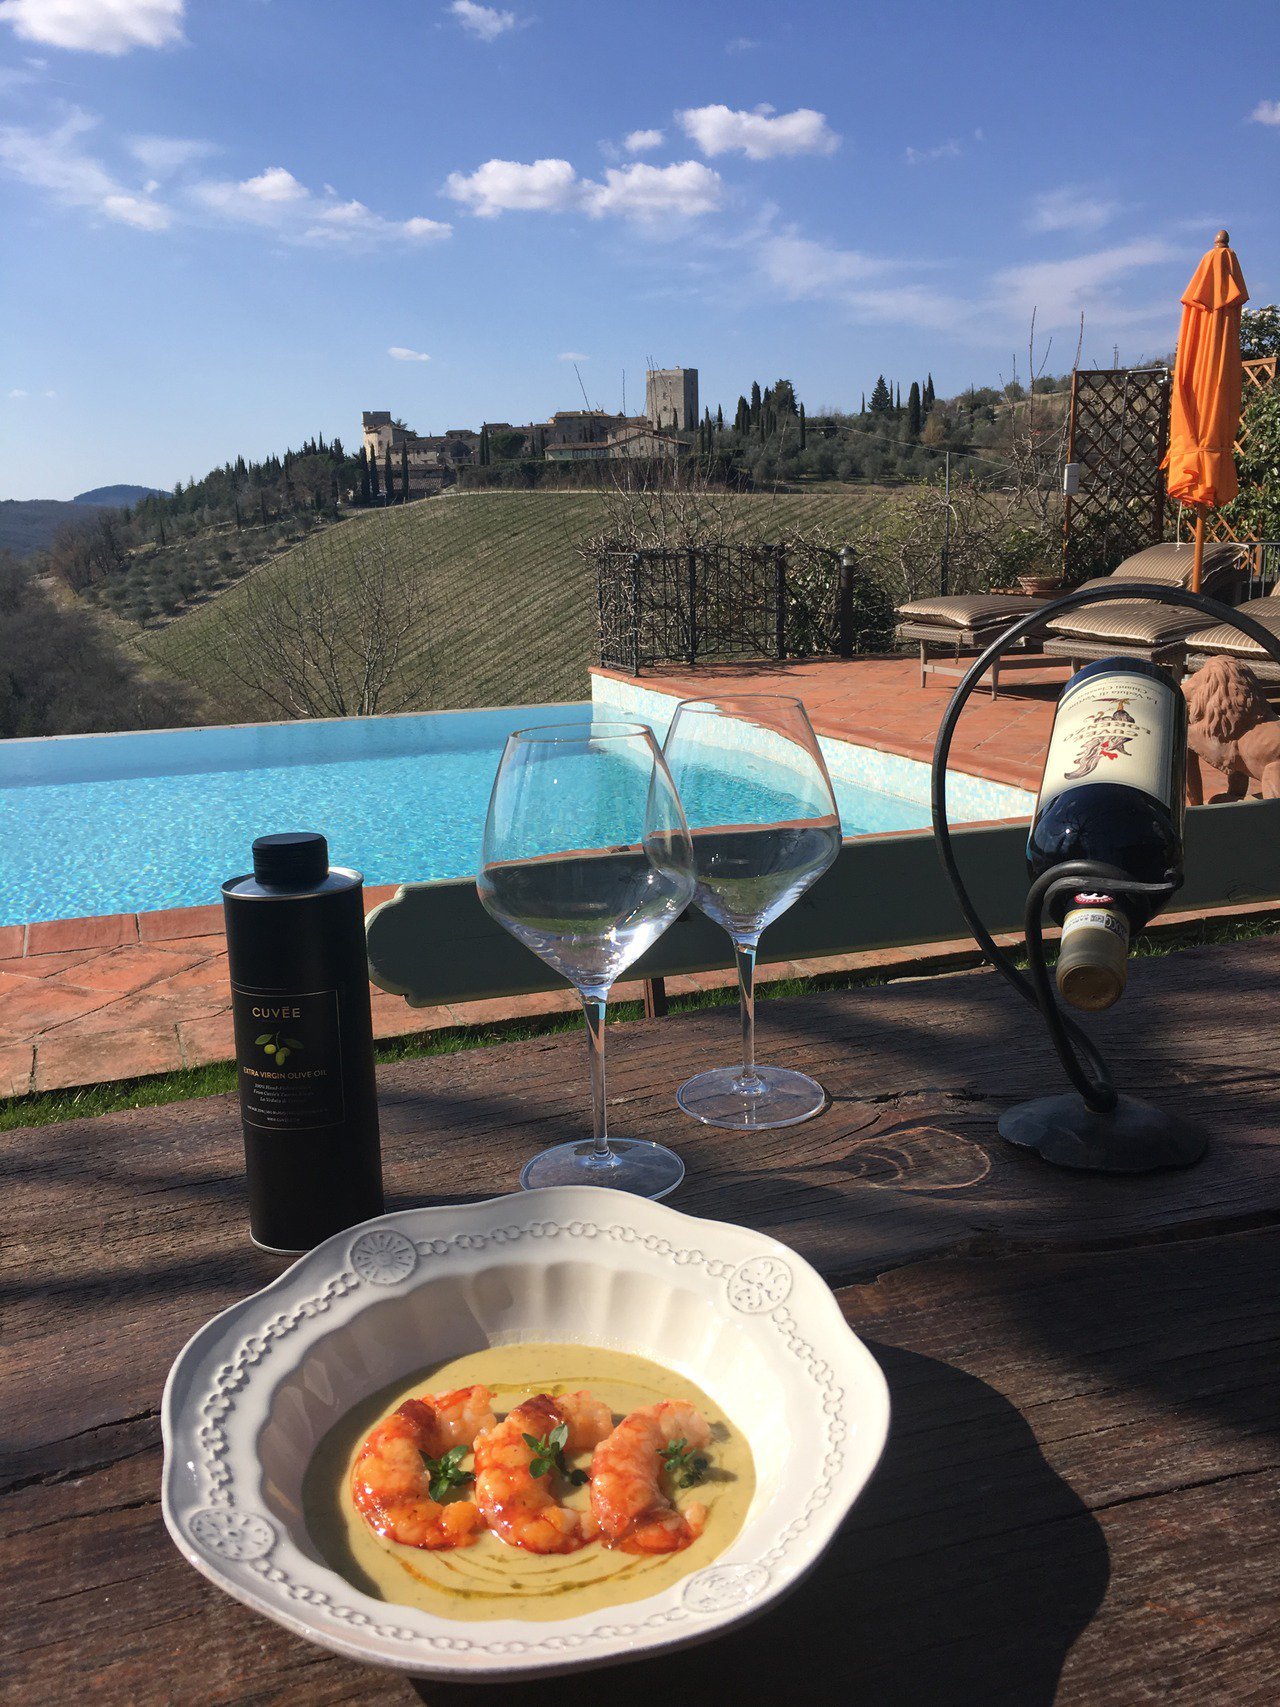 Lunch with a view #staycuvee #tuscany https://t.co/dx5PrDkTN0